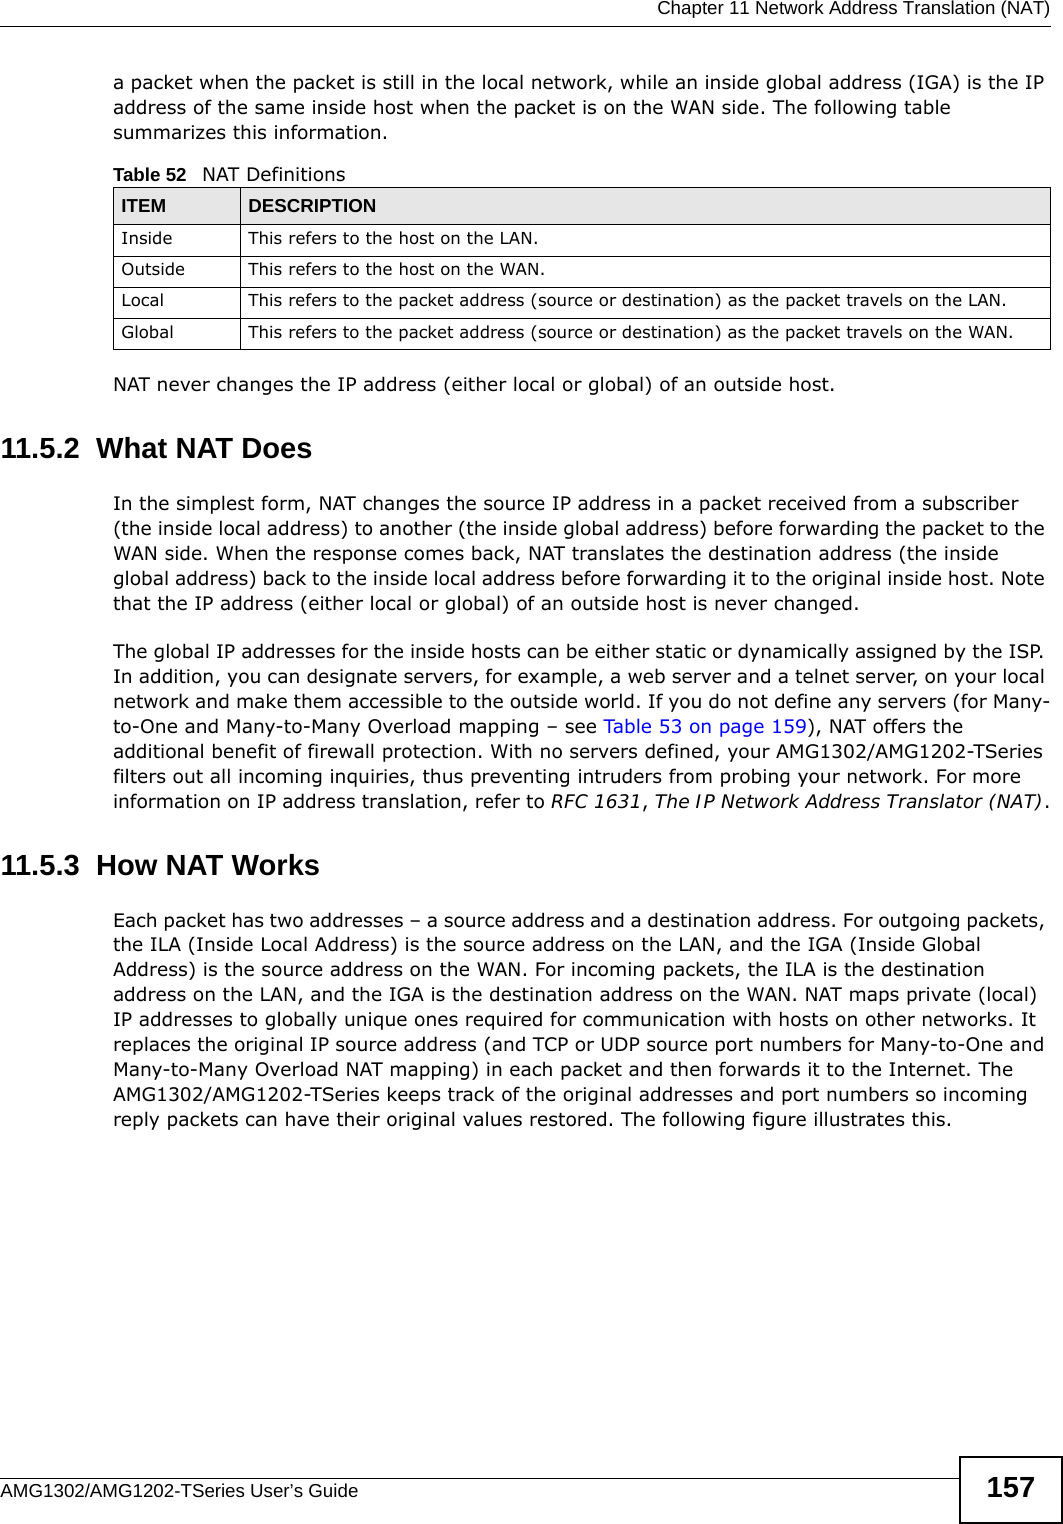  Chapter 11 Network Address Translation (NAT)AMG1302/AMG1202-TSeries User’s Guide 157a packet when the packet is still in the local network, while an inside global address (IGA) is the IP address of the same inside host when the packet is on the WAN side. The following table summarizes this information.NAT never changes the IP address (either local or global) of an outside host.11.5.2  What NAT DoesIn the simplest form, NAT changes the source IP address in a packet received from a subscriber (the inside local address) to another (the inside global address) before forwarding the packet to the WAN side. When the response comes back, NAT translates the destination address (the inside global address) back to the inside local address before forwarding it to the original inside host. Note that the IP address (either local or global) of an outside host is never changed.The global IP addresses for the inside hosts can be either static or dynamically assigned by the ISP. In addition, you can designate servers, for example, a web server and a telnet server, on your local network and make them accessible to the outside world. If you do not define any servers (for Many-to-One and Many-to-Many Overload mapping – see Table 53 on page 159), NAT offers the additional benefit of firewall protection. With no servers defined, your AMG1302/AMG1202-TSeries filters out all incoming inquiries, thus preventing intruders from probing your network. For more information on IP address translation, refer to RFC 1631, The IP Network Address Translator (NAT).11.5.3  How NAT WorksEach packet has two addresses – a source address and a destination address. For outgoing packets, the ILA (Inside Local Address) is the source address on the LAN, and the IGA (Inside Global Address) is the source address on the WAN. For incoming packets, the ILA is the destination address on the LAN, and the IGA is the destination address on the WAN. NAT maps private (local) IP addresses to globally unique ones required for communication with hosts on other networks. It replaces the original IP source address (and TCP or UDP source port numbers for Many-to-One and Many-to-Many Overload NAT mapping) in each packet and then forwards it to the Internet. The AMG1302/AMG1202-TSeries keeps track of the original addresses and port numbers so incoming reply packets can have their original values restored. The following figure illustrates this.Table 52   NAT DefinitionsITEM DESCRIPTIONInside This refers to the host on the LAN.Outside This refers to the host on the WAN.Local This refers to the packet address (source or destination) as the packet travels on the LAN.Global This refers to the packet address (source or destination) as the packet travels on the WAN.